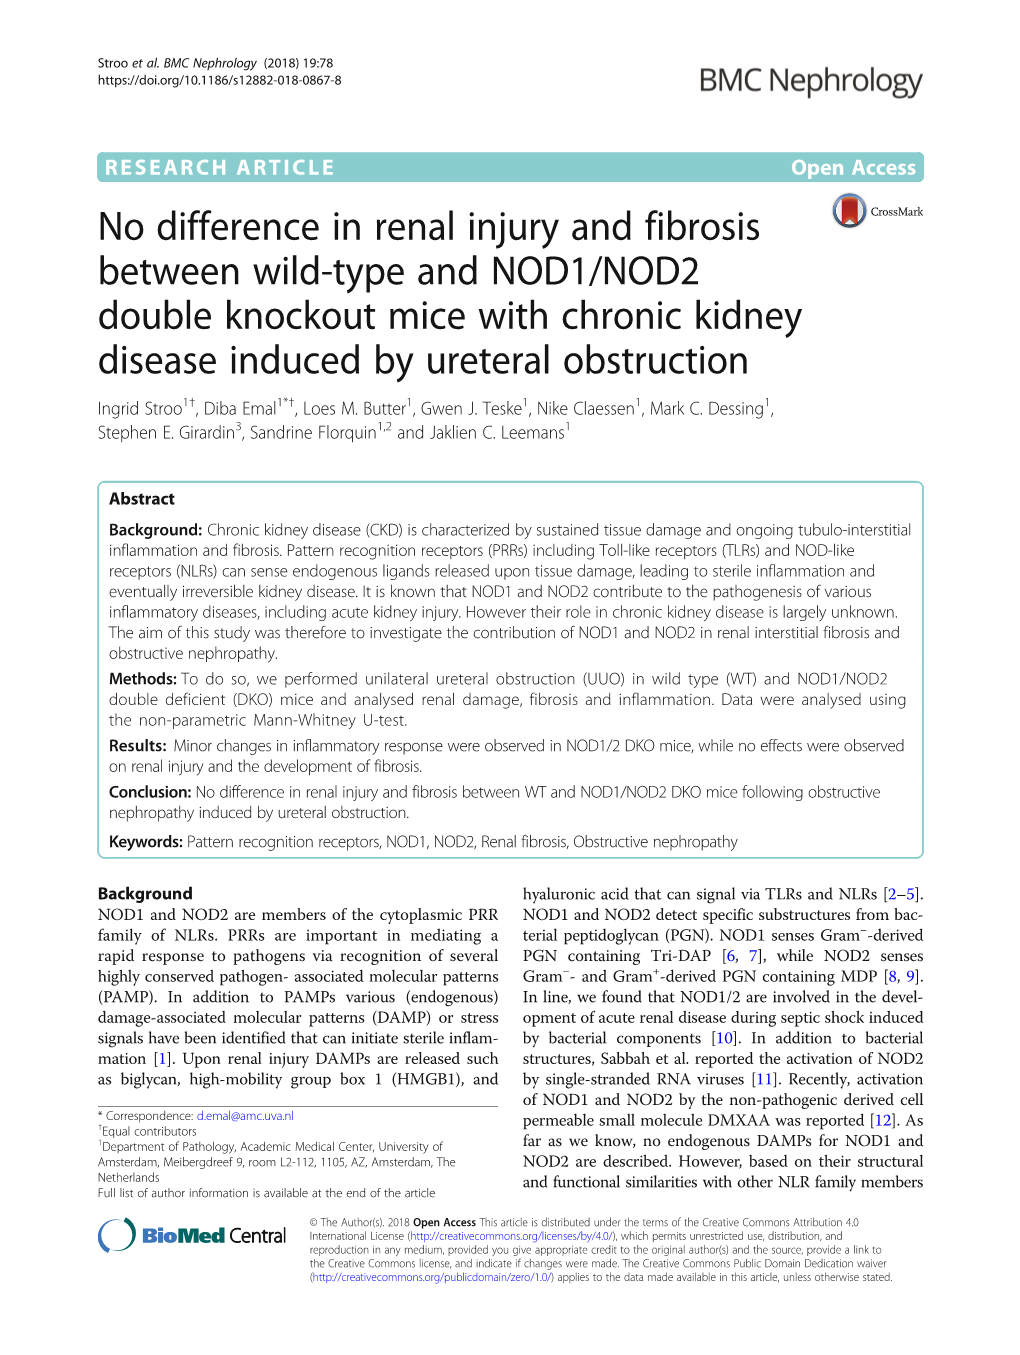 No Difference in Renal Injury and Fibrosis Between Wild-Type and NOD1/NOD2 Double Knockout Mice with Chronic Kidney Disease Indu